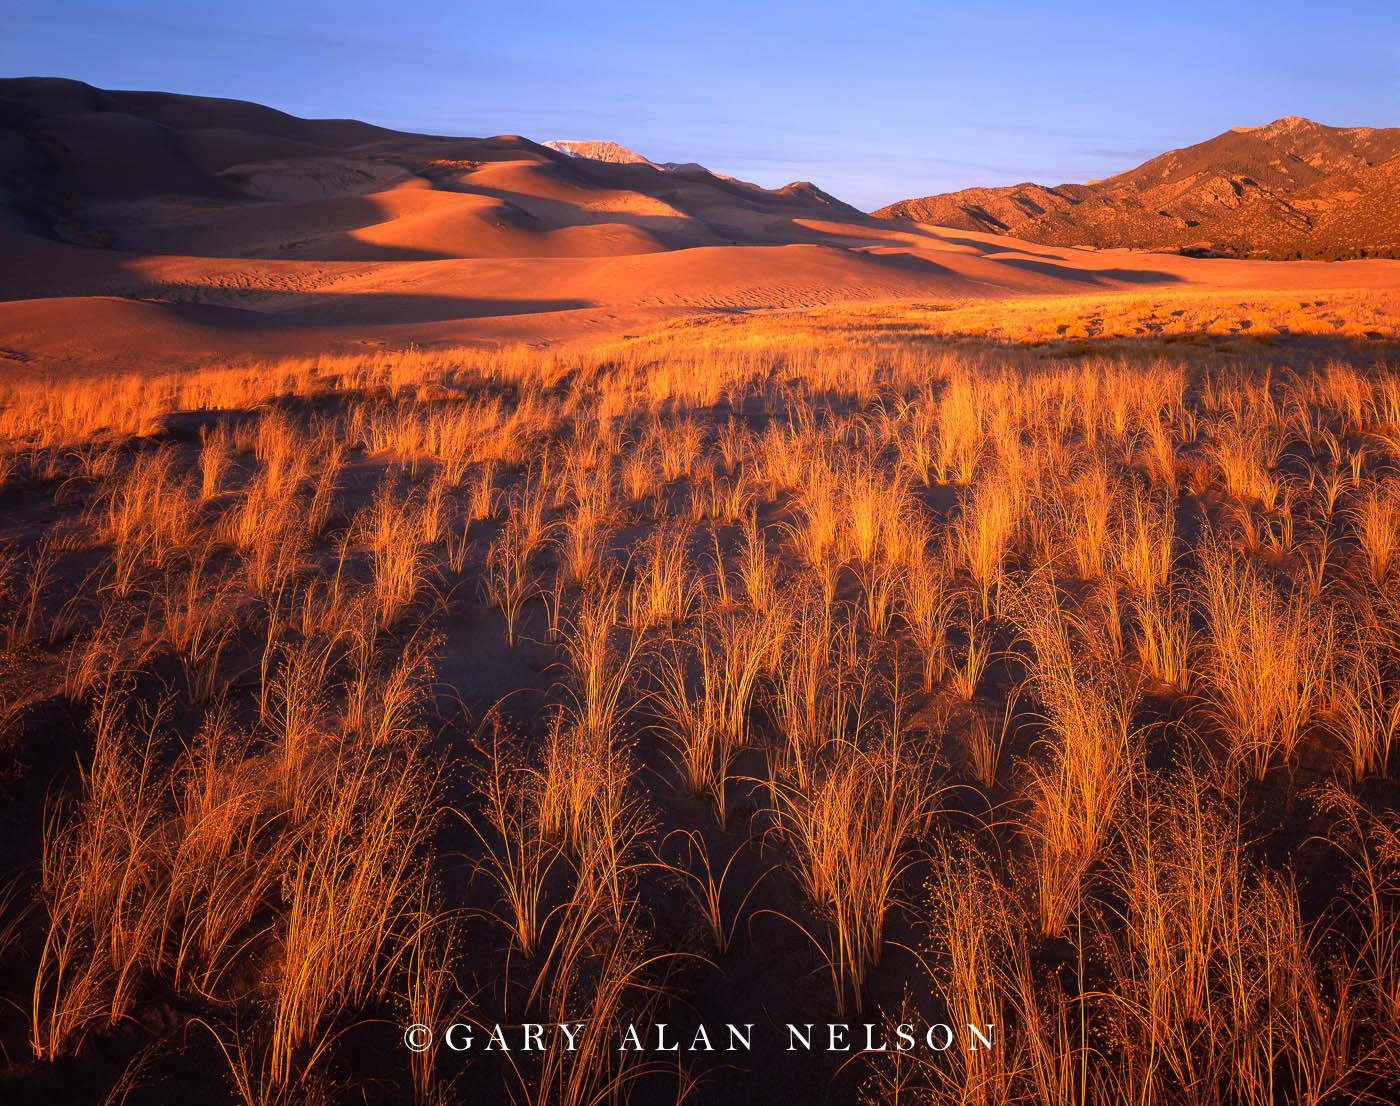 CO-04-2-NM Indian rice grass illuminated by the evening sun, Great Sand Dunes National Park, Colorado